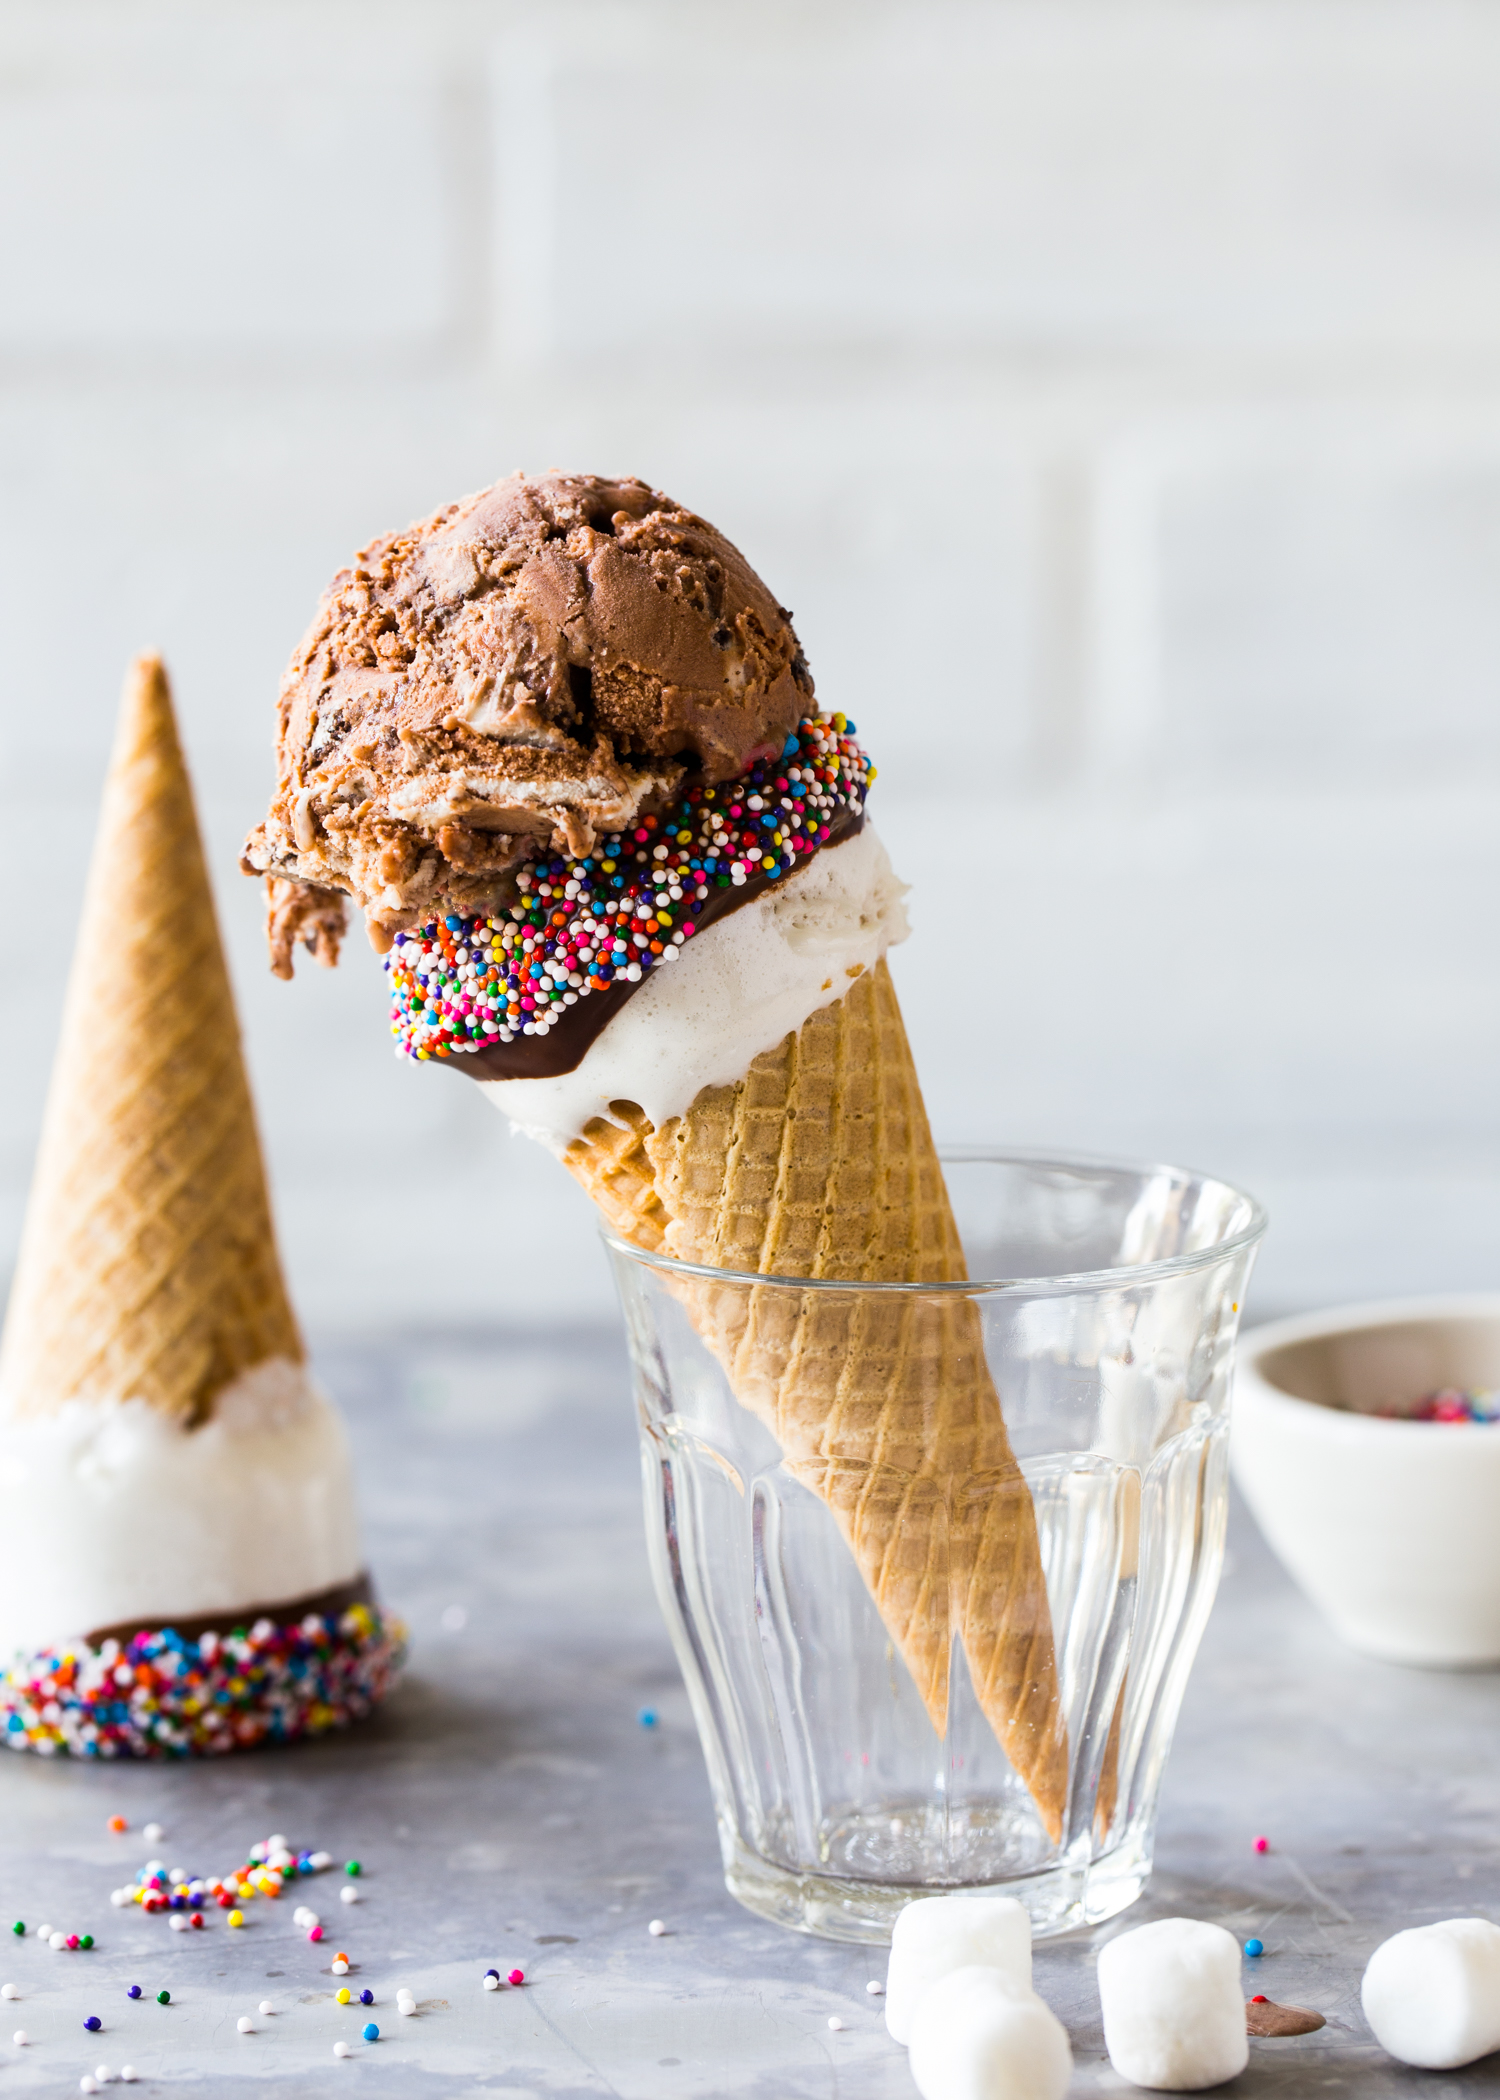 Marshmallow Dipped Ice Cream Cones for summer time fun!